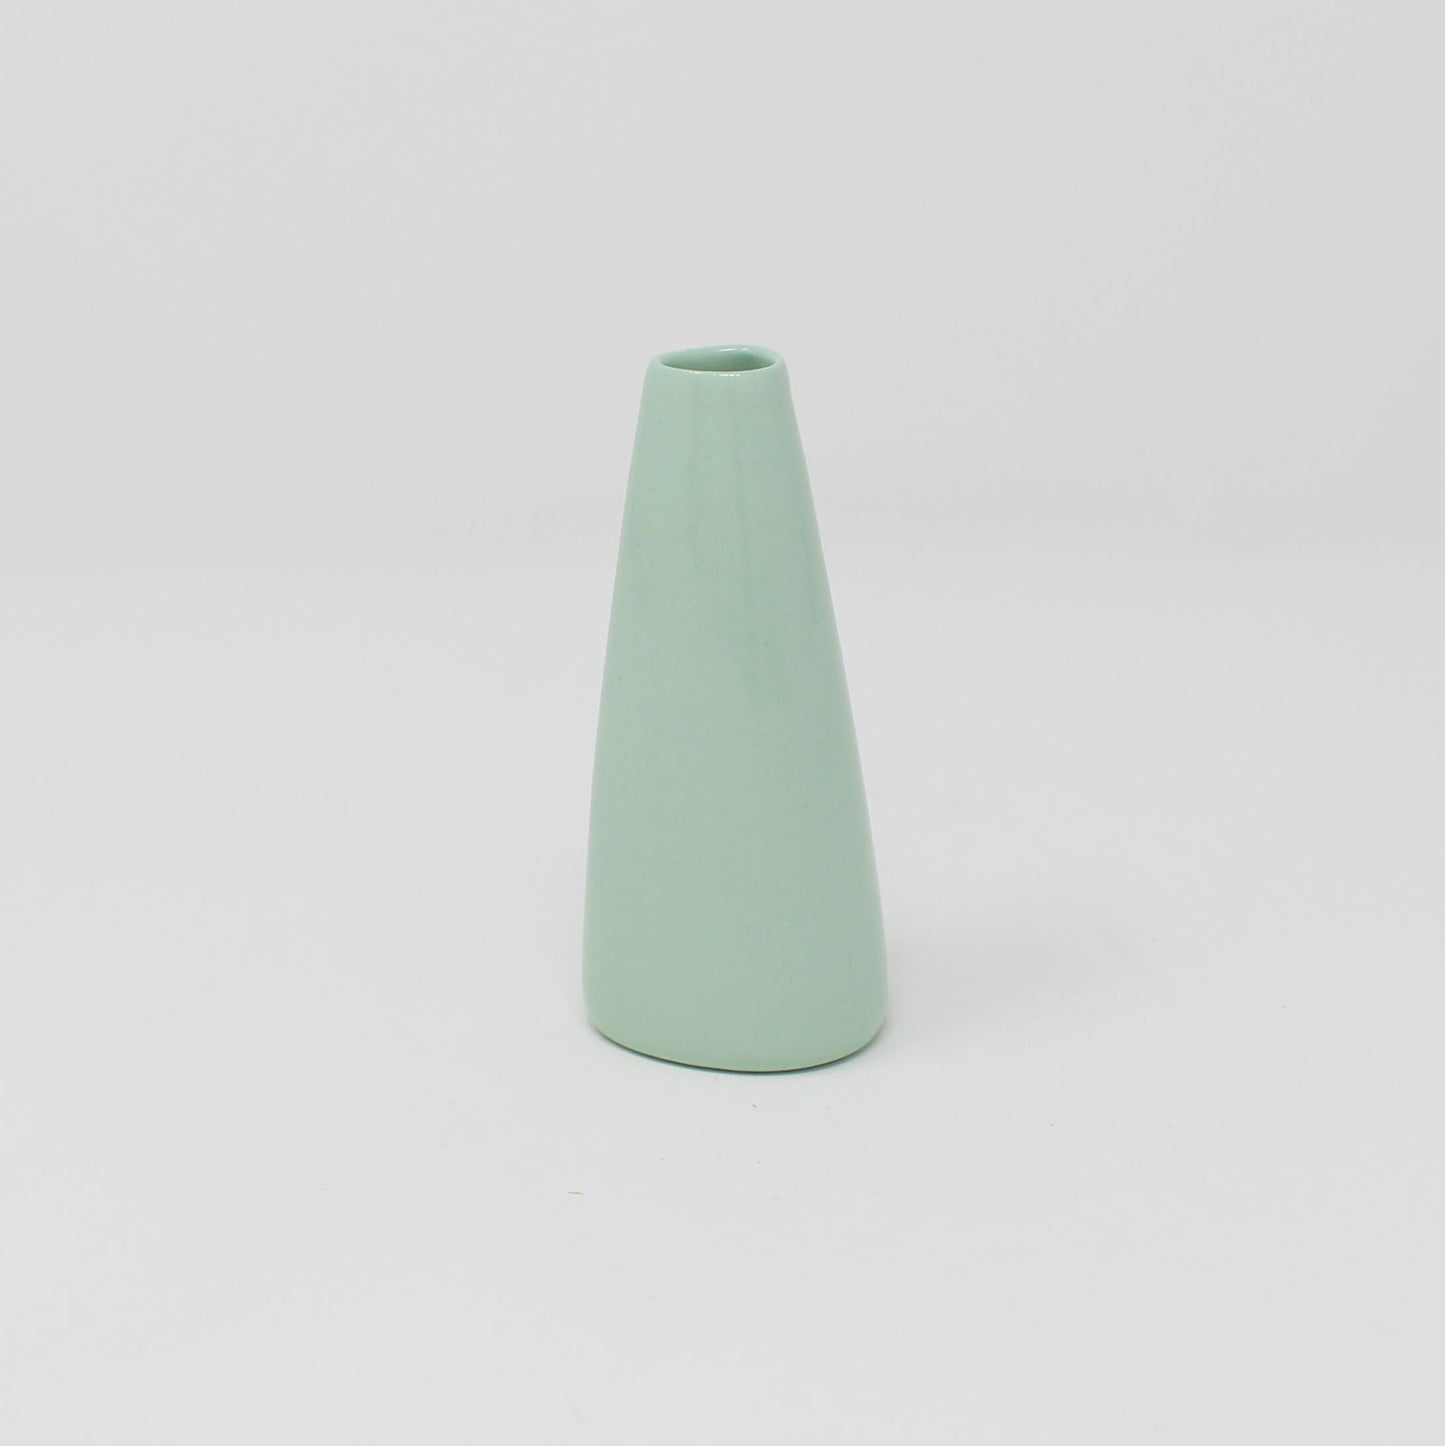 One Color : Vase No. 1 Tiny